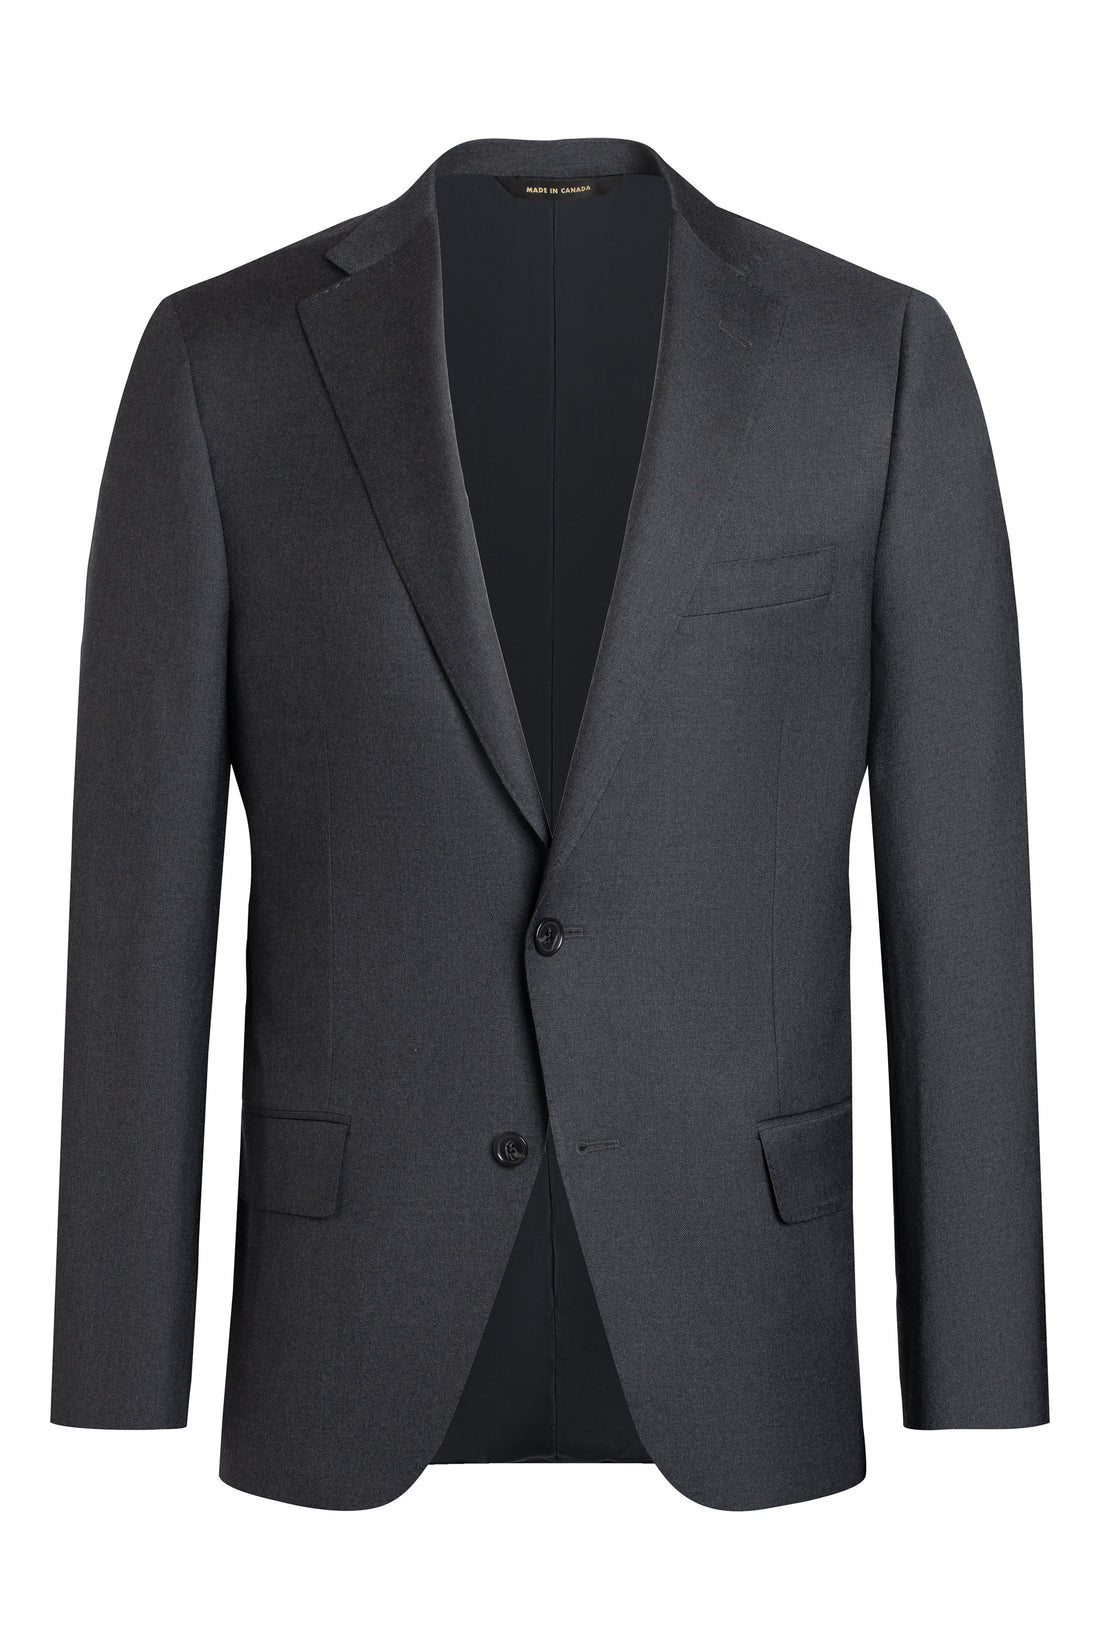 Charcoal Solid Suit